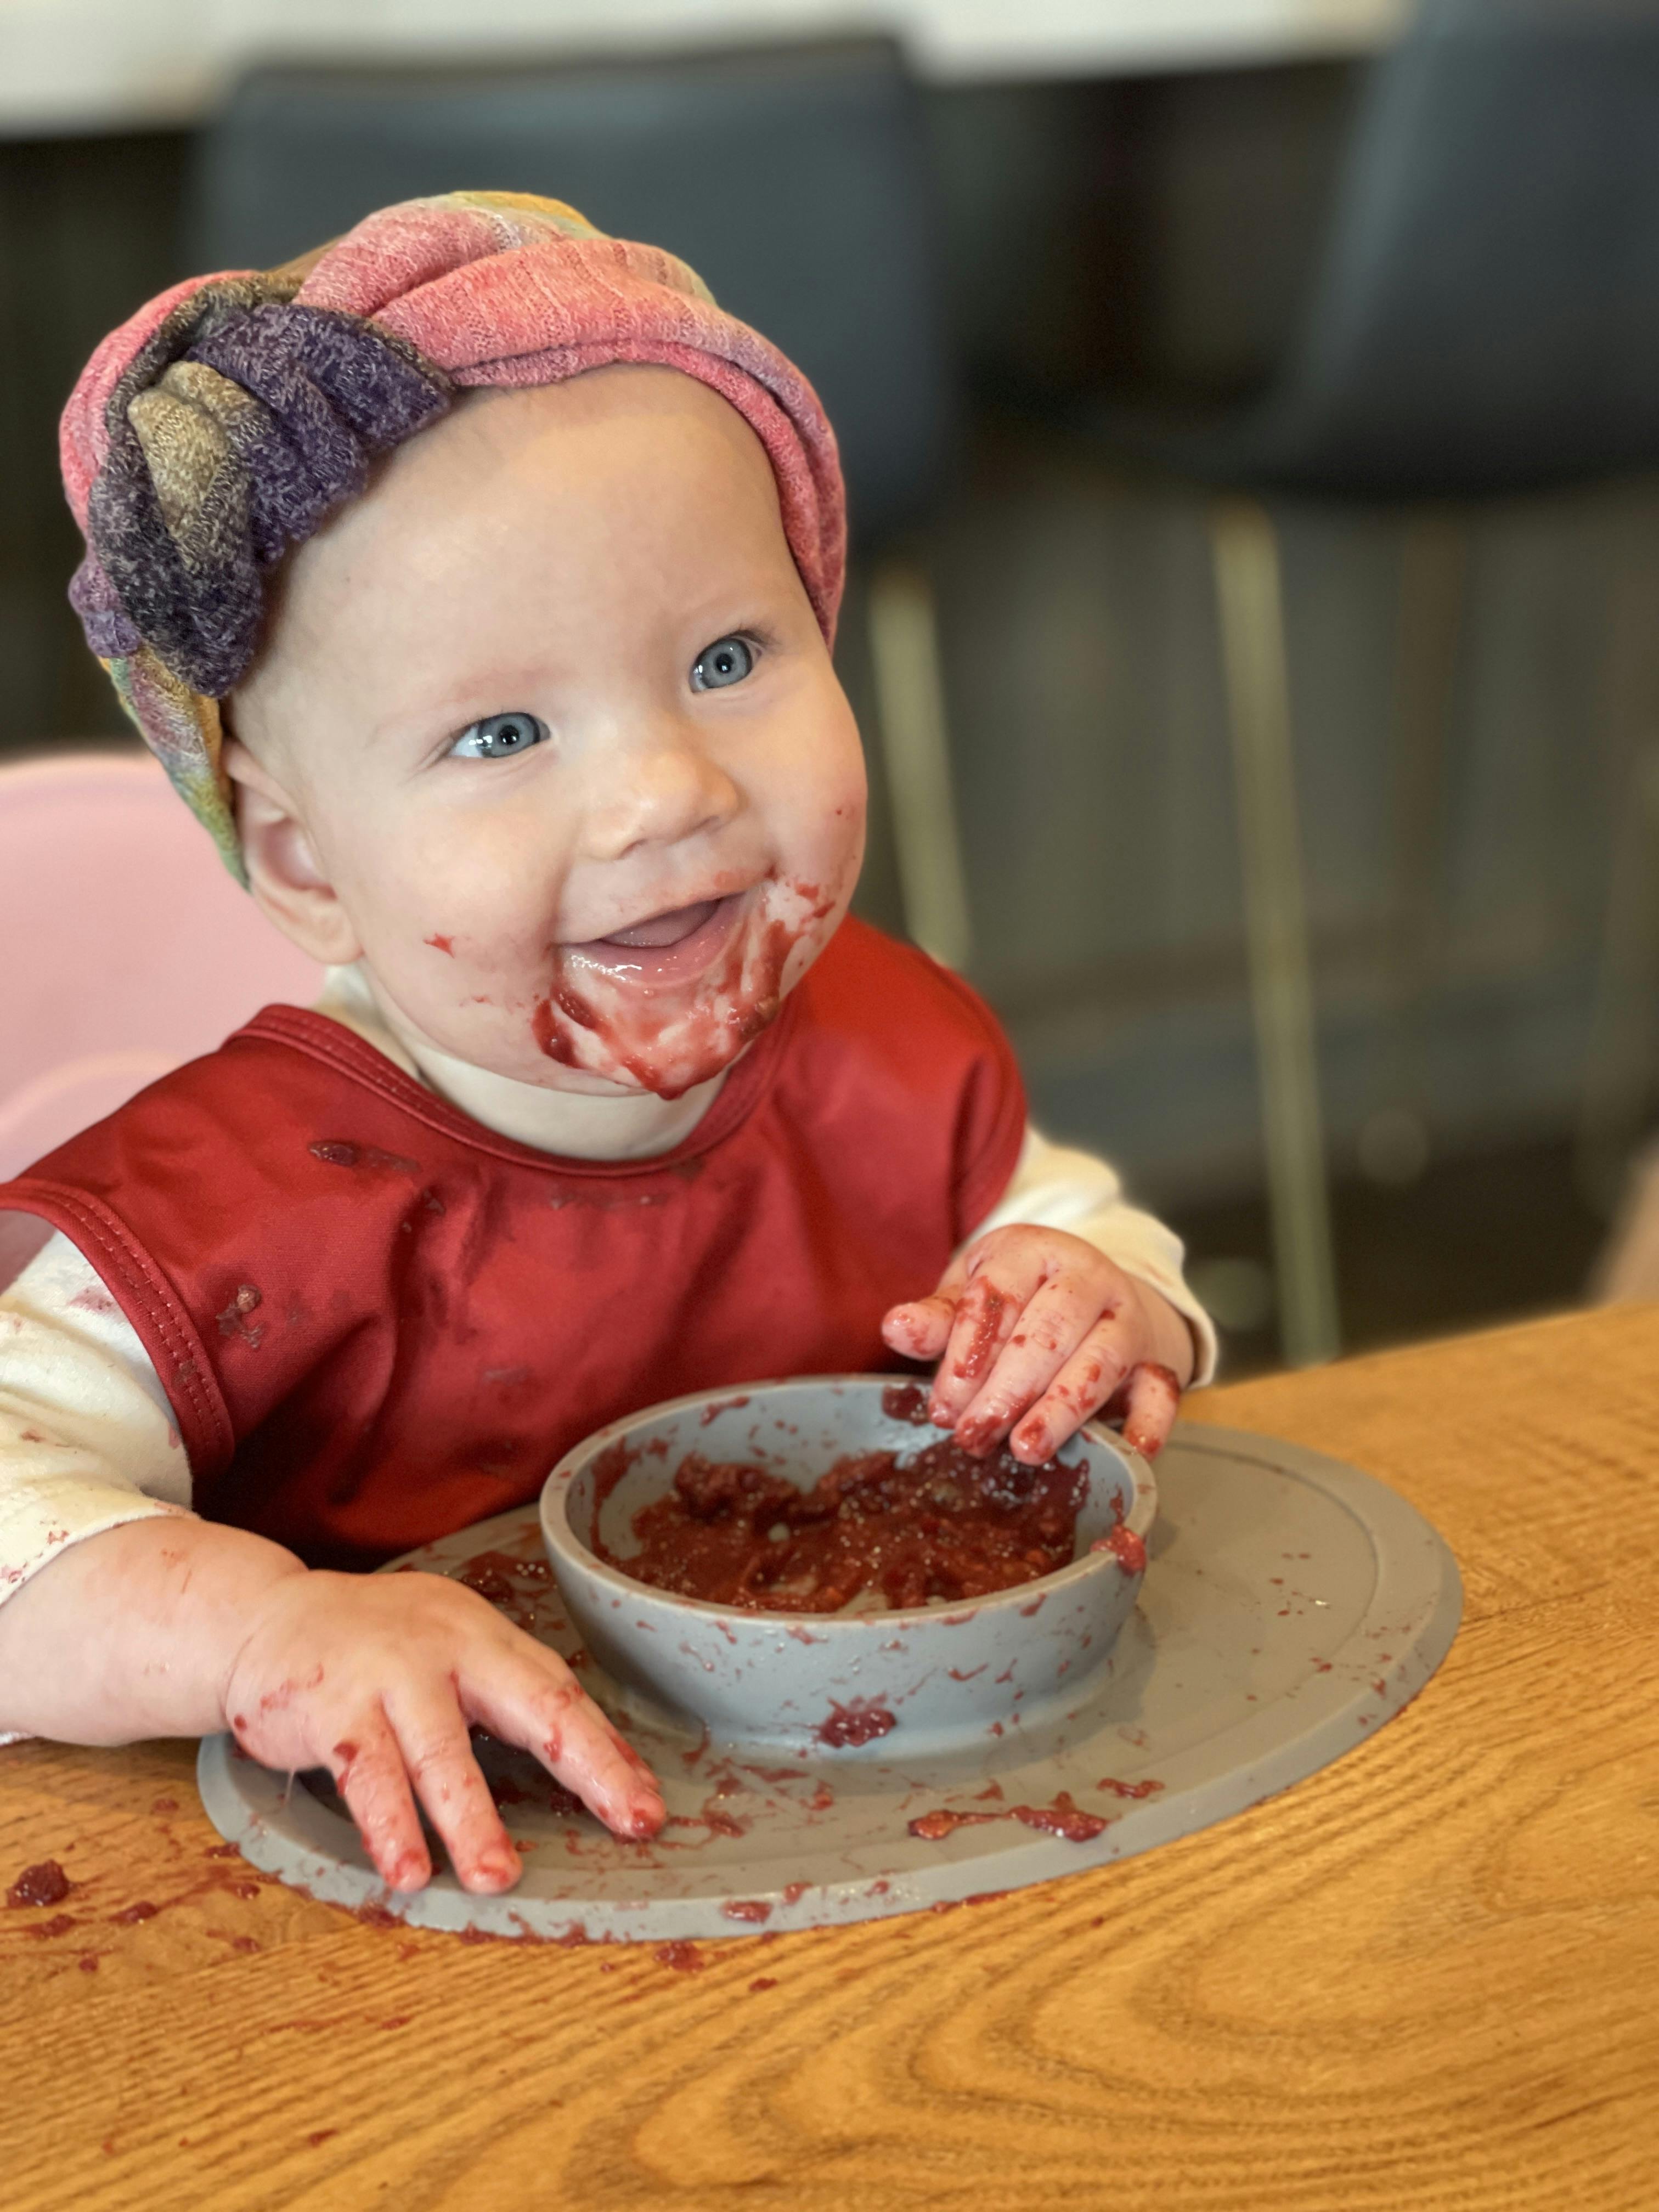 Baby-led weaning can be messy but it's part of the experience!